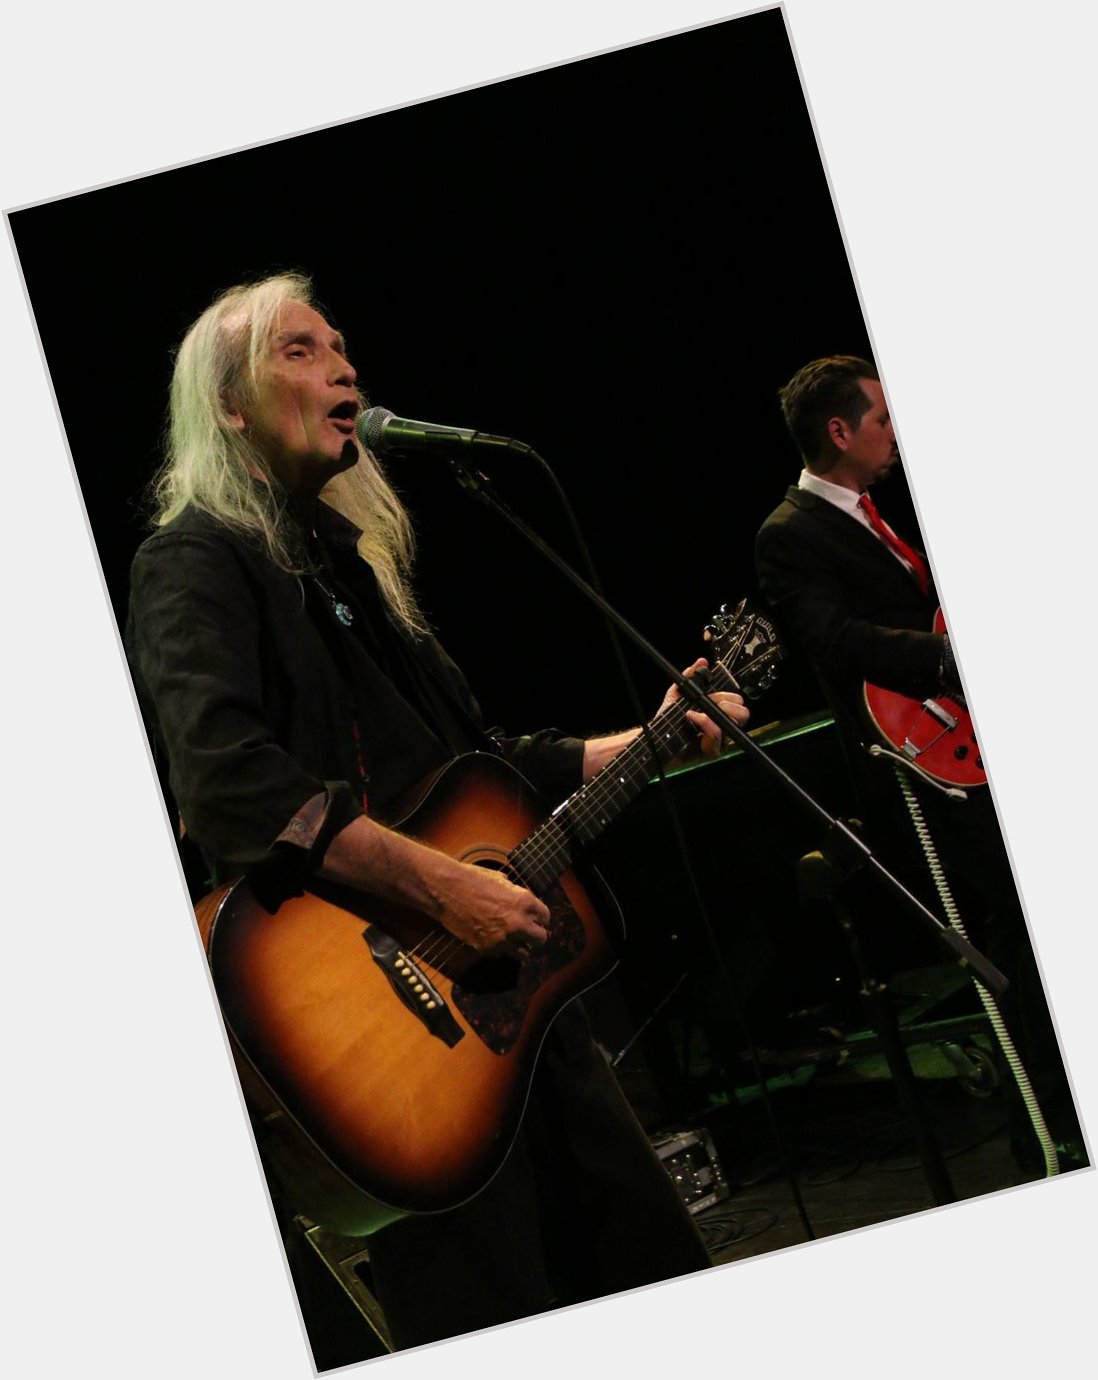 Happy Birthday Jimmie Dale Gilmore! Long may you run. With gratitude and love... 